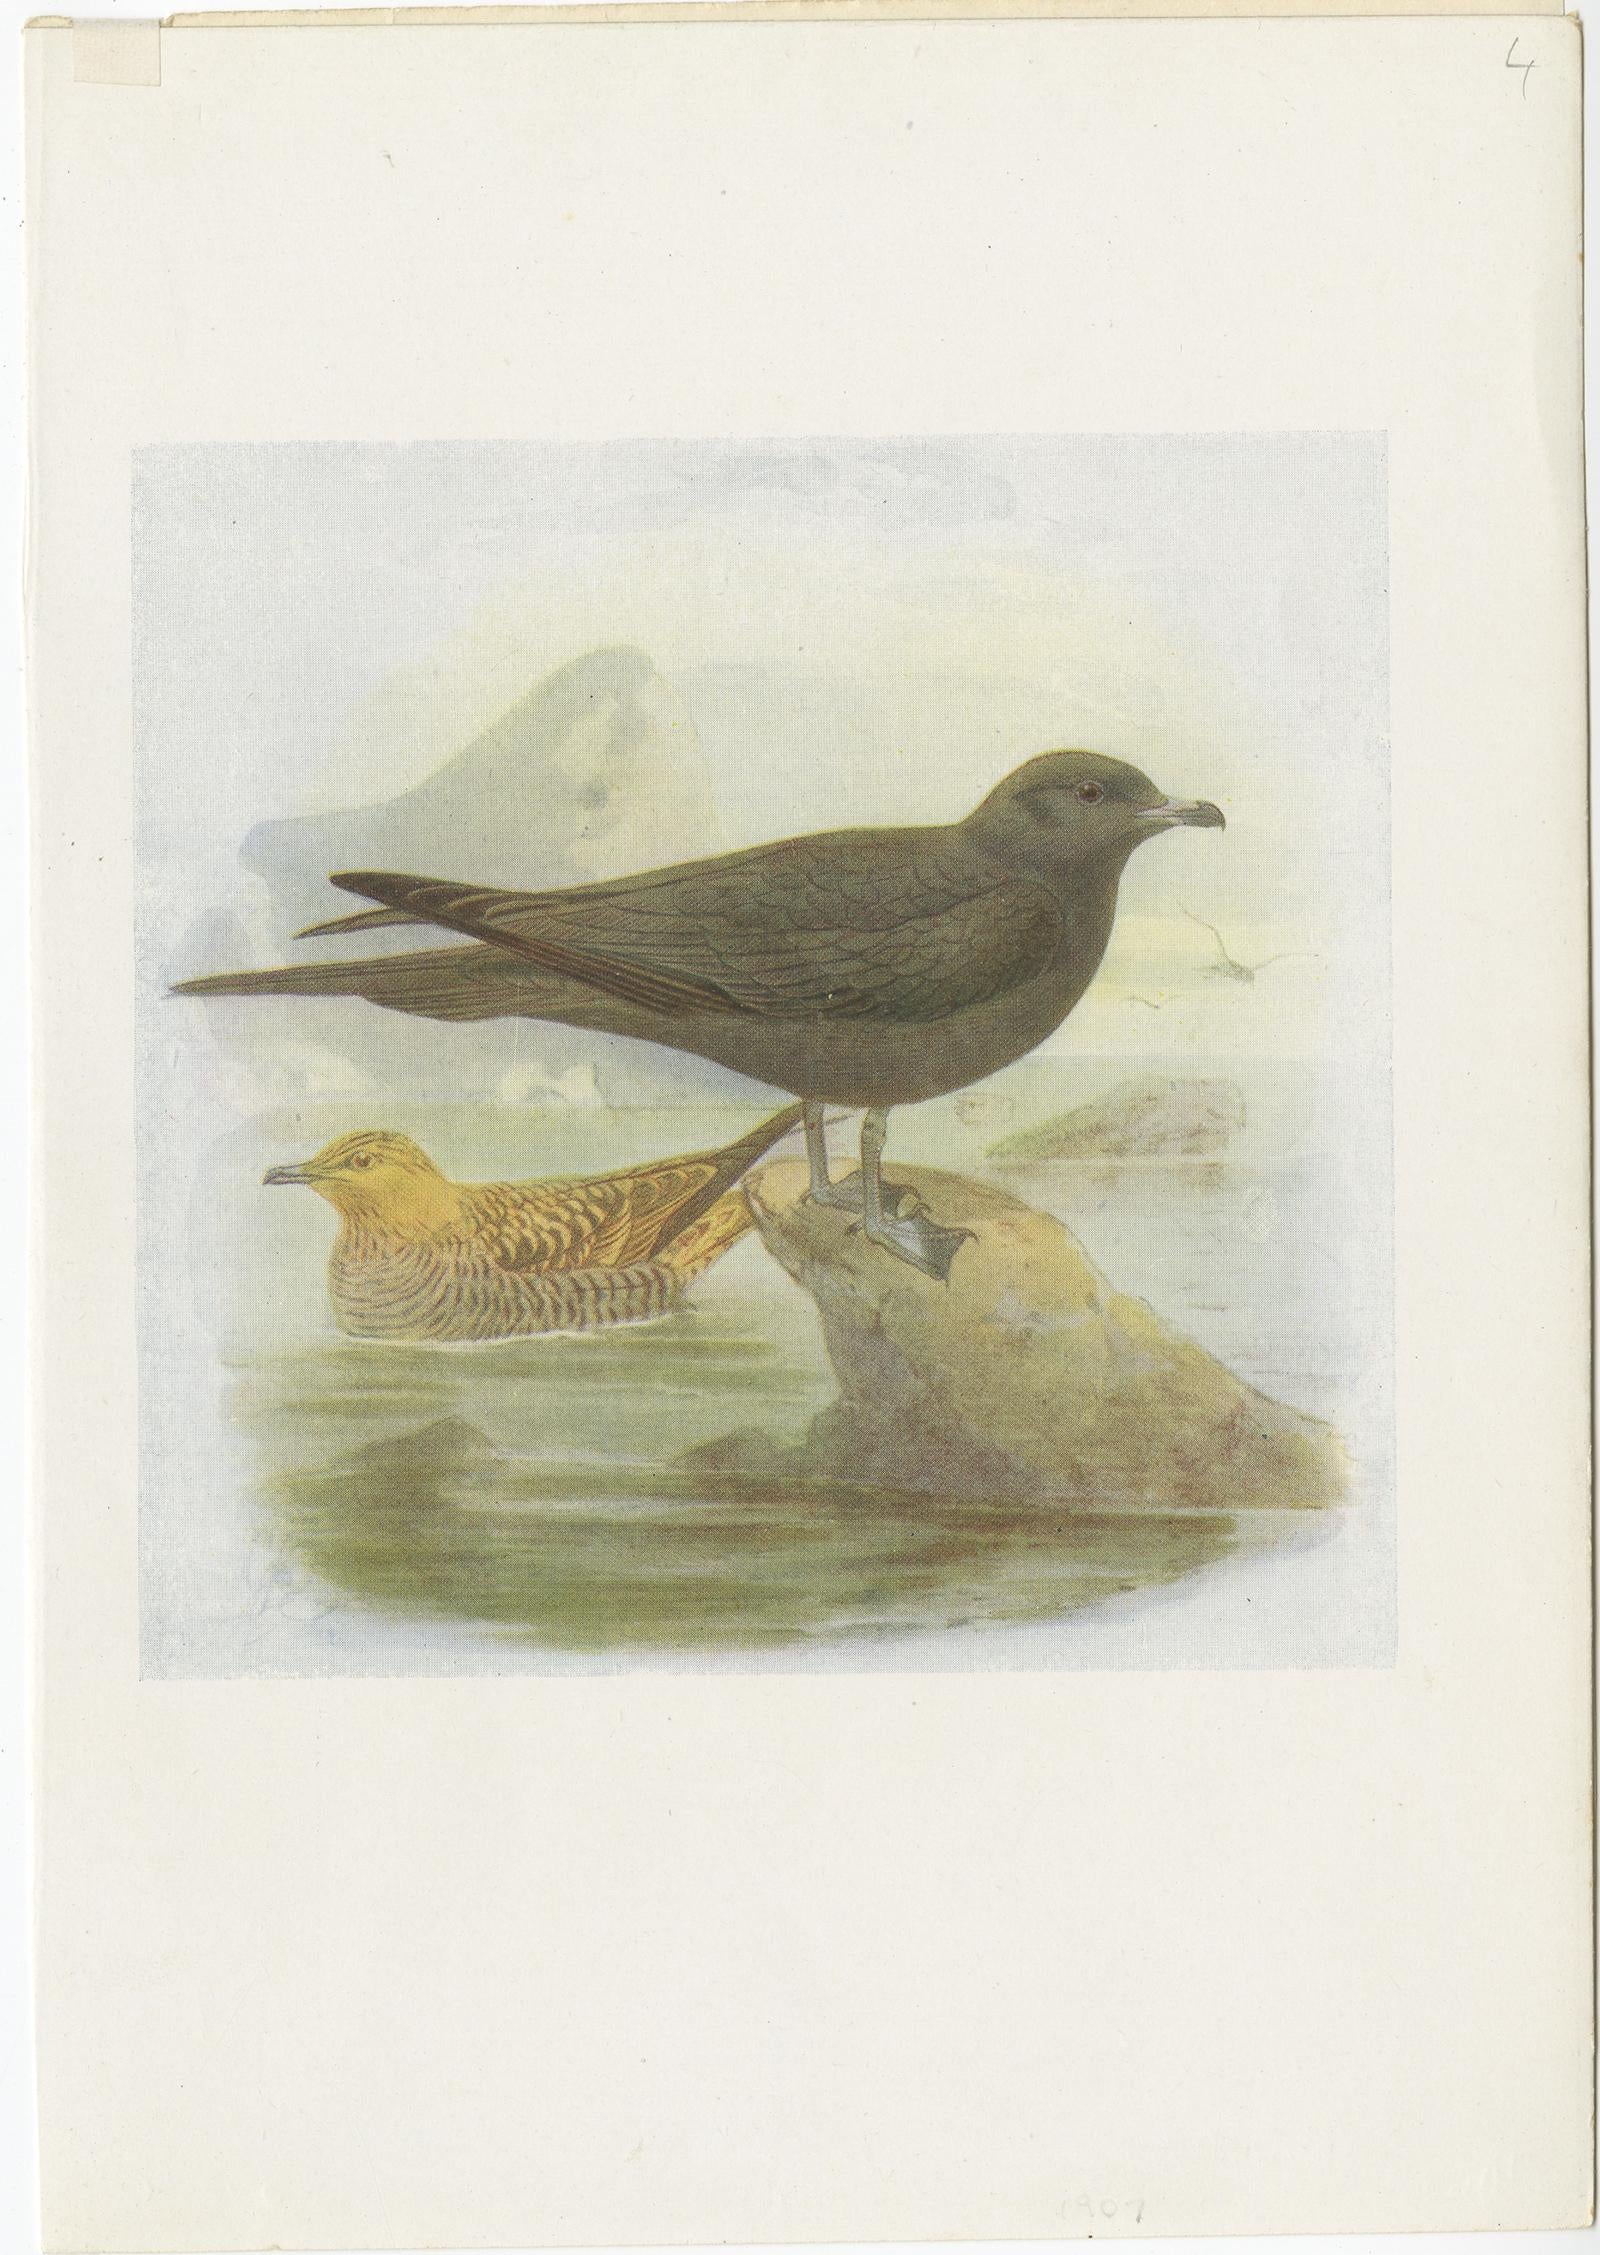 Antique Bird Print of Richardson's Skua. This print originates from 'Birds of Britain' by J. Lewis Bonhote. 

Artists and Engravers: J. Lewis Bonhote was an English ornithologist. Bonhote was born in London and educated at Harrow School and